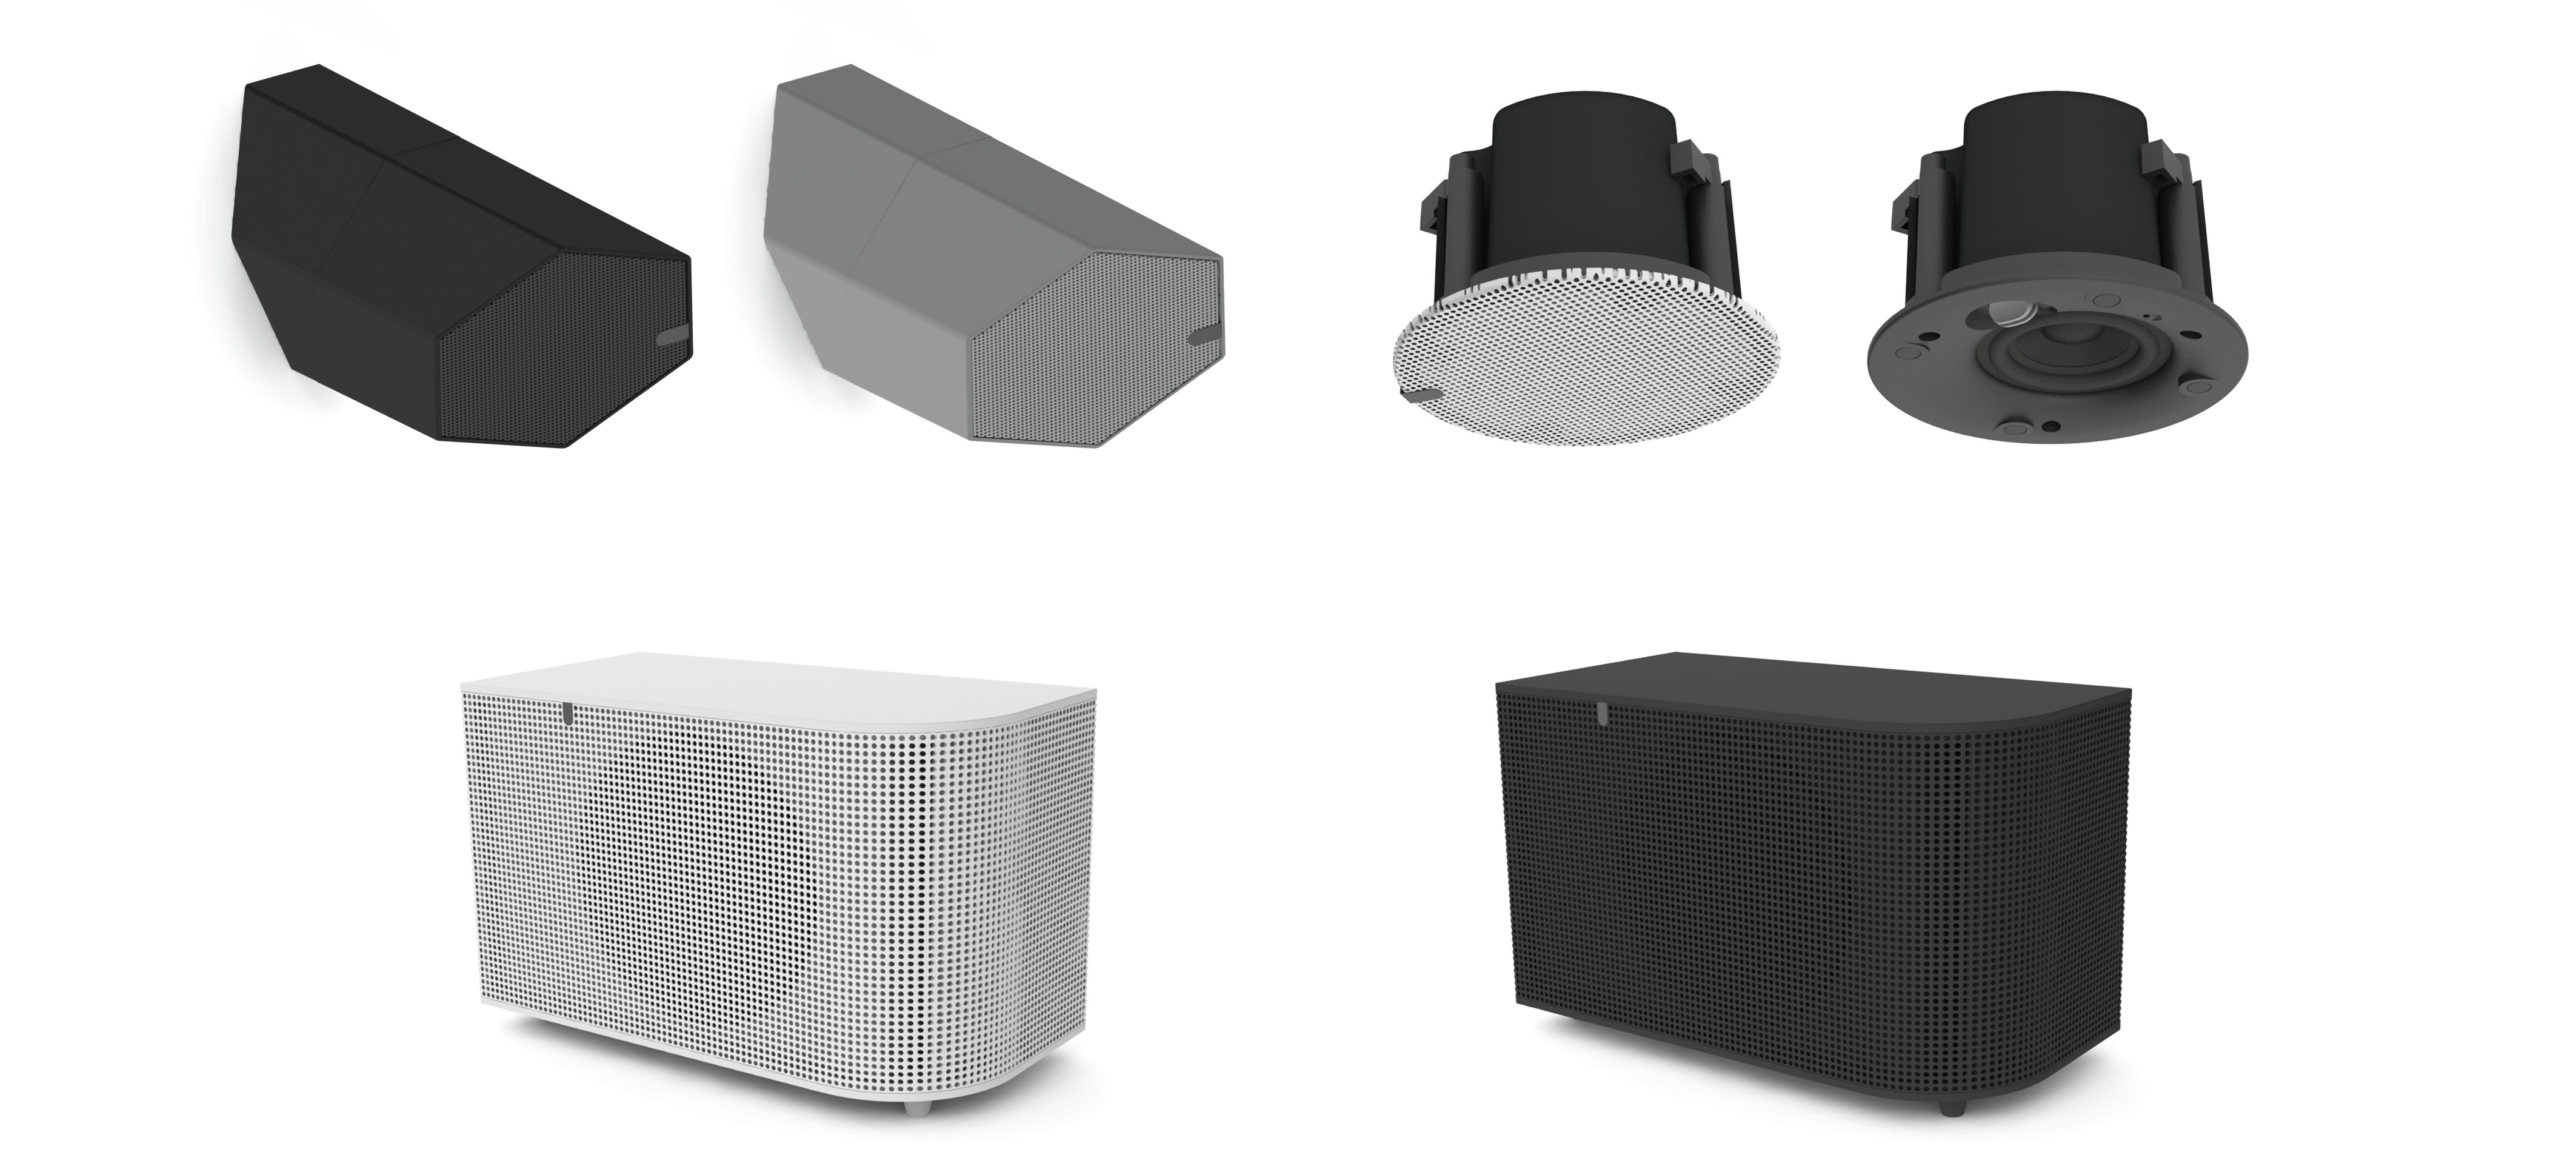 New Contractor Speaker Models at ISE 2016